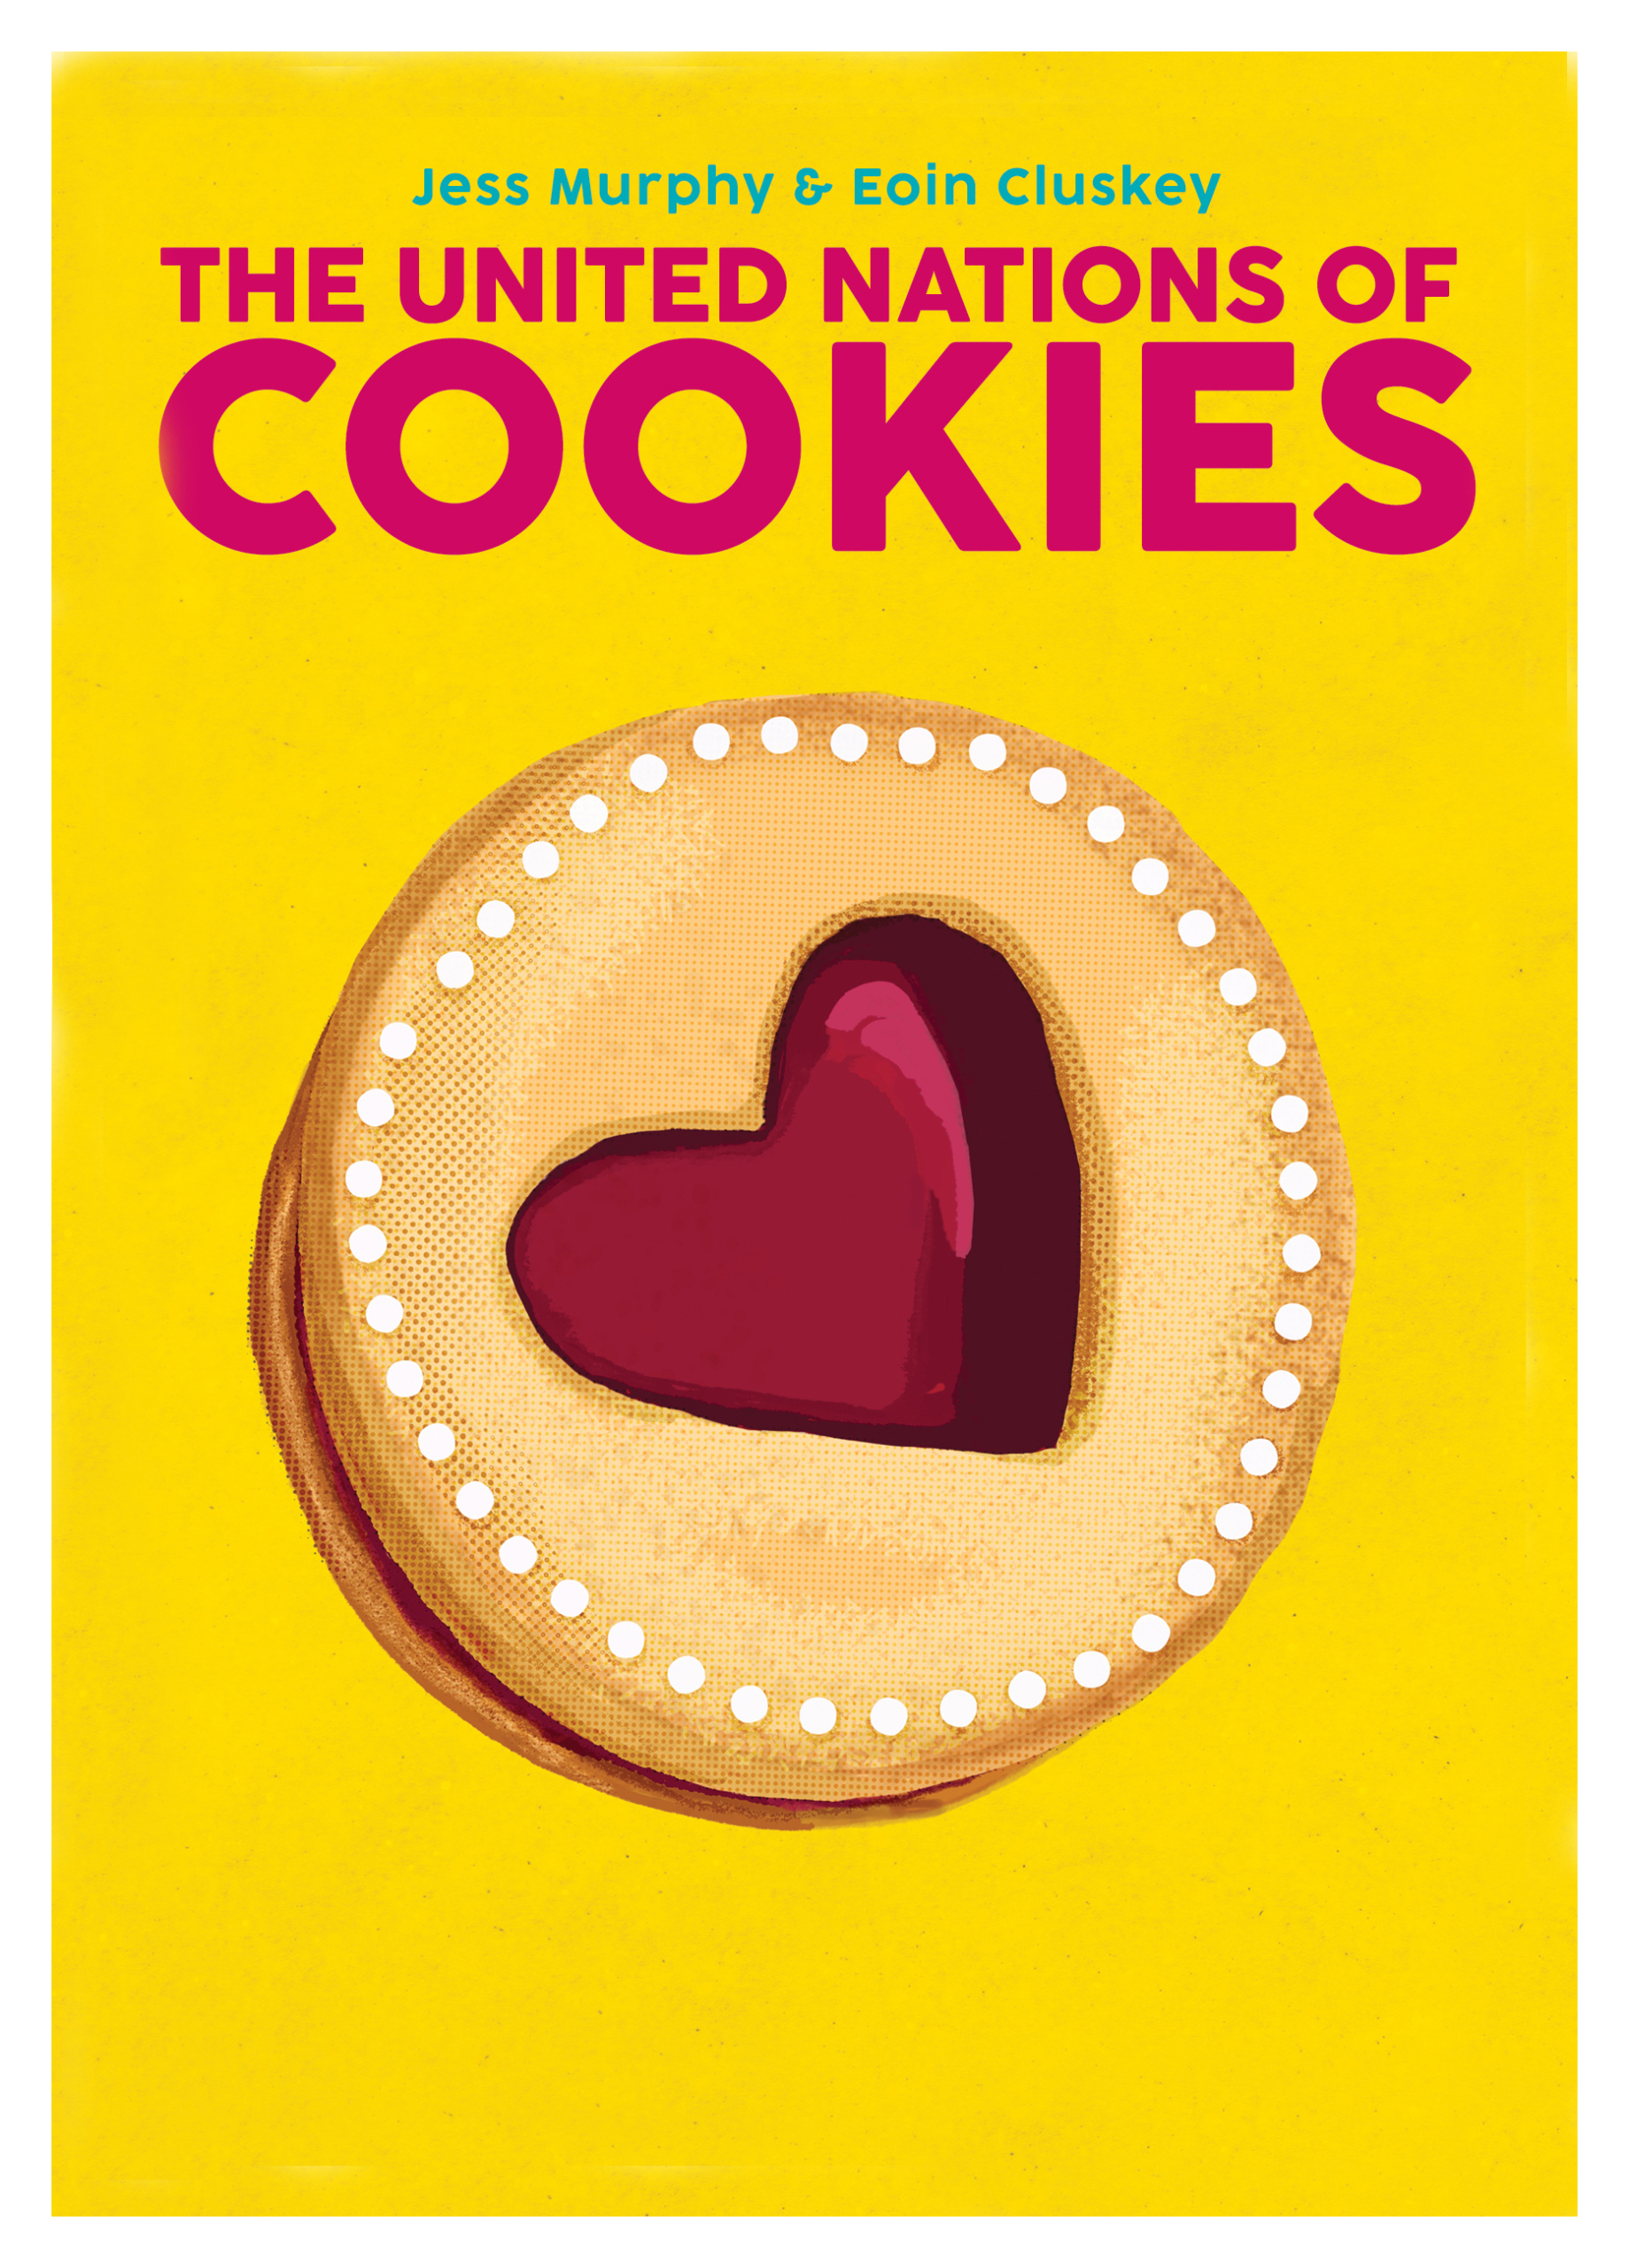 Blasta Books_3_The United Nations of Cookies_Cover